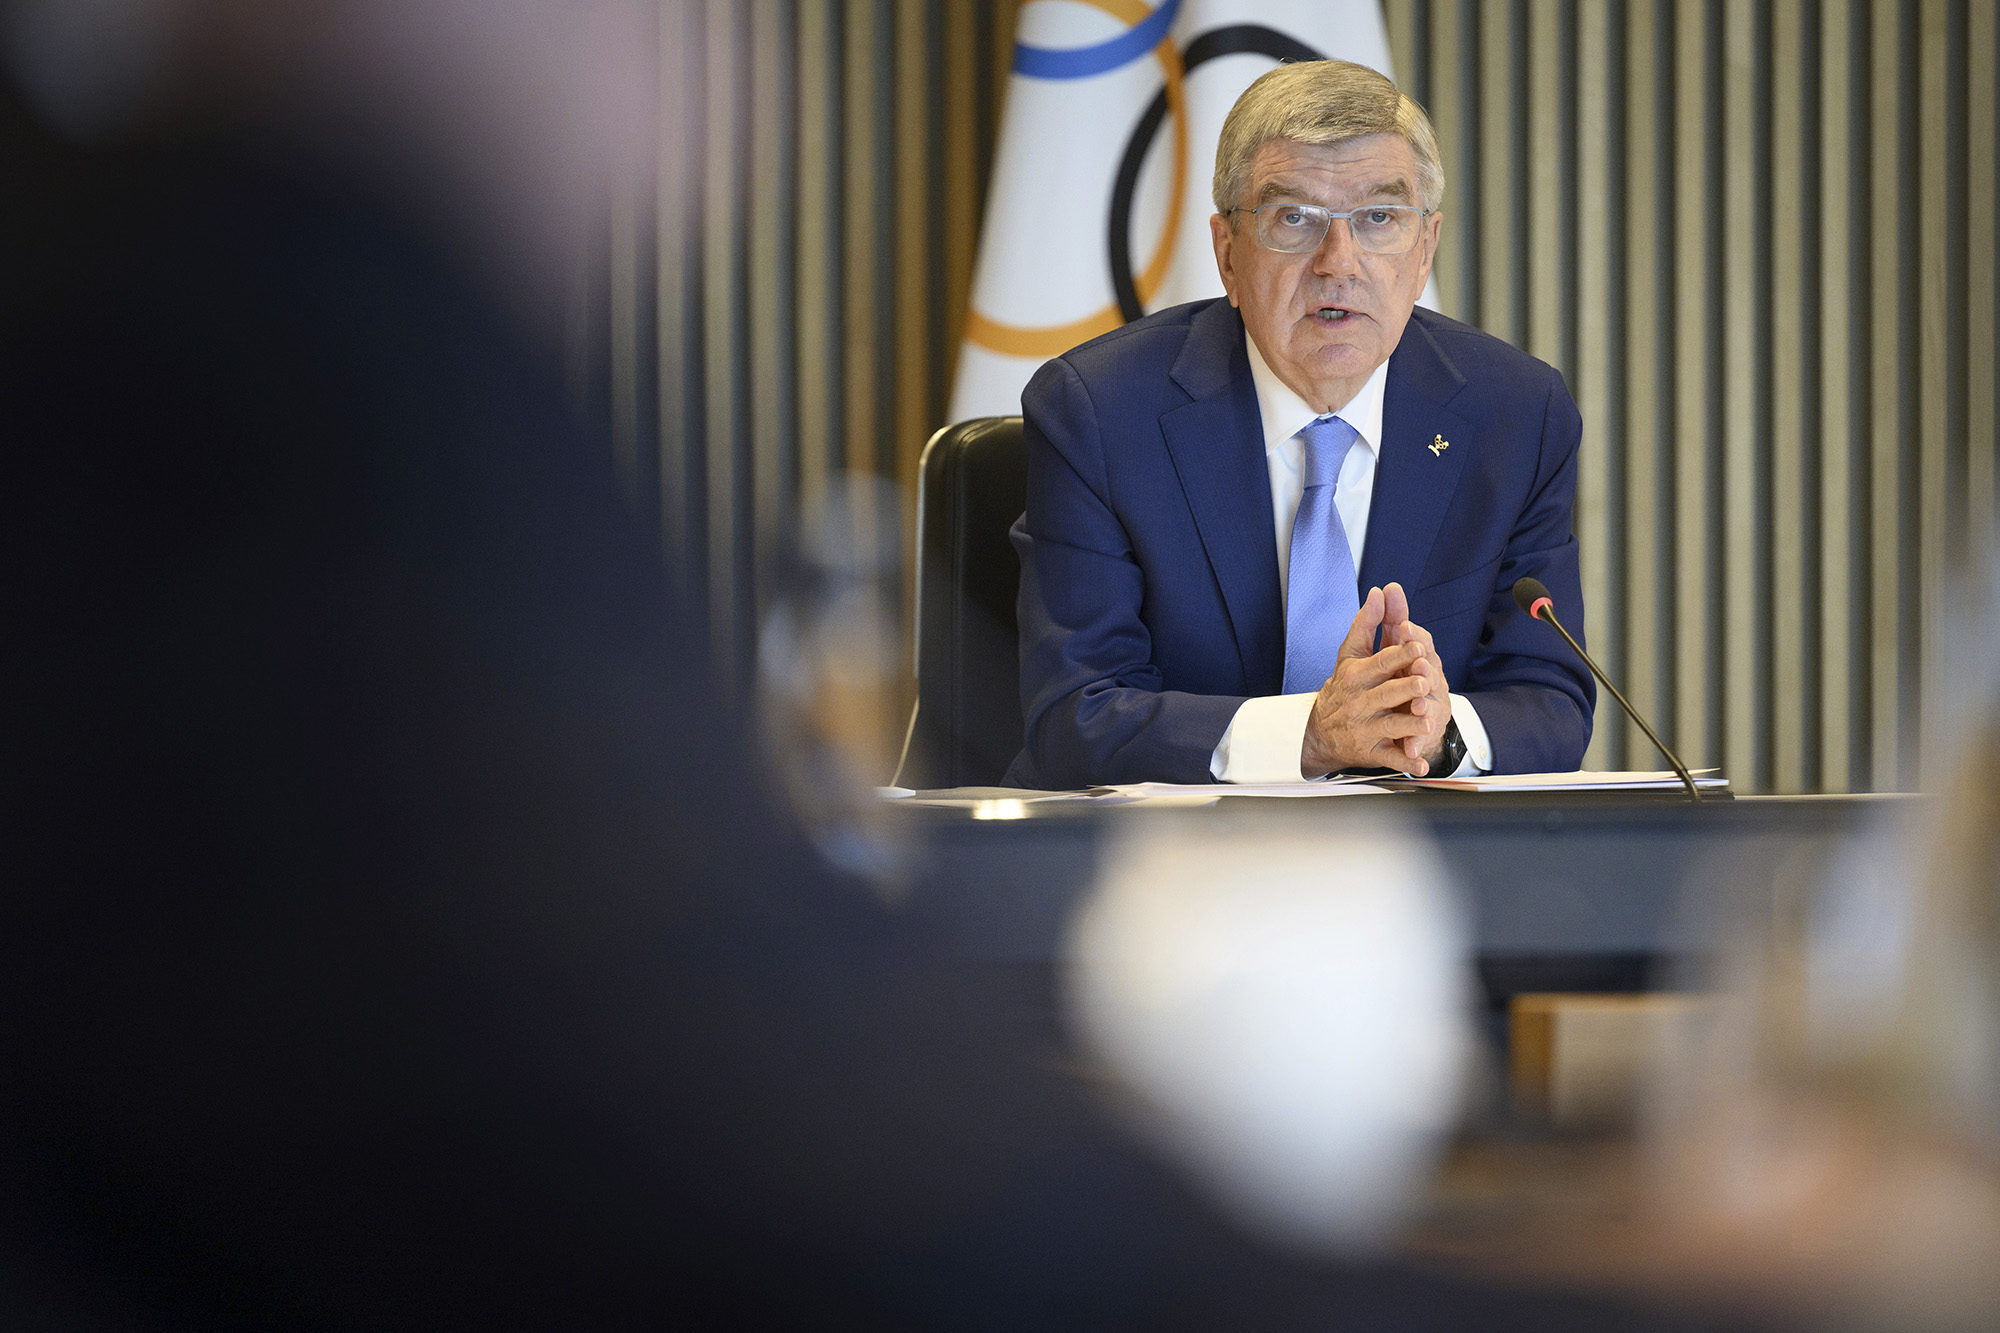 International Olympic Committee (IOC) President Thomas Bach speaks at the opening of the executive board meeting of the IOC in Lausanne, Switzerland, on March 28.